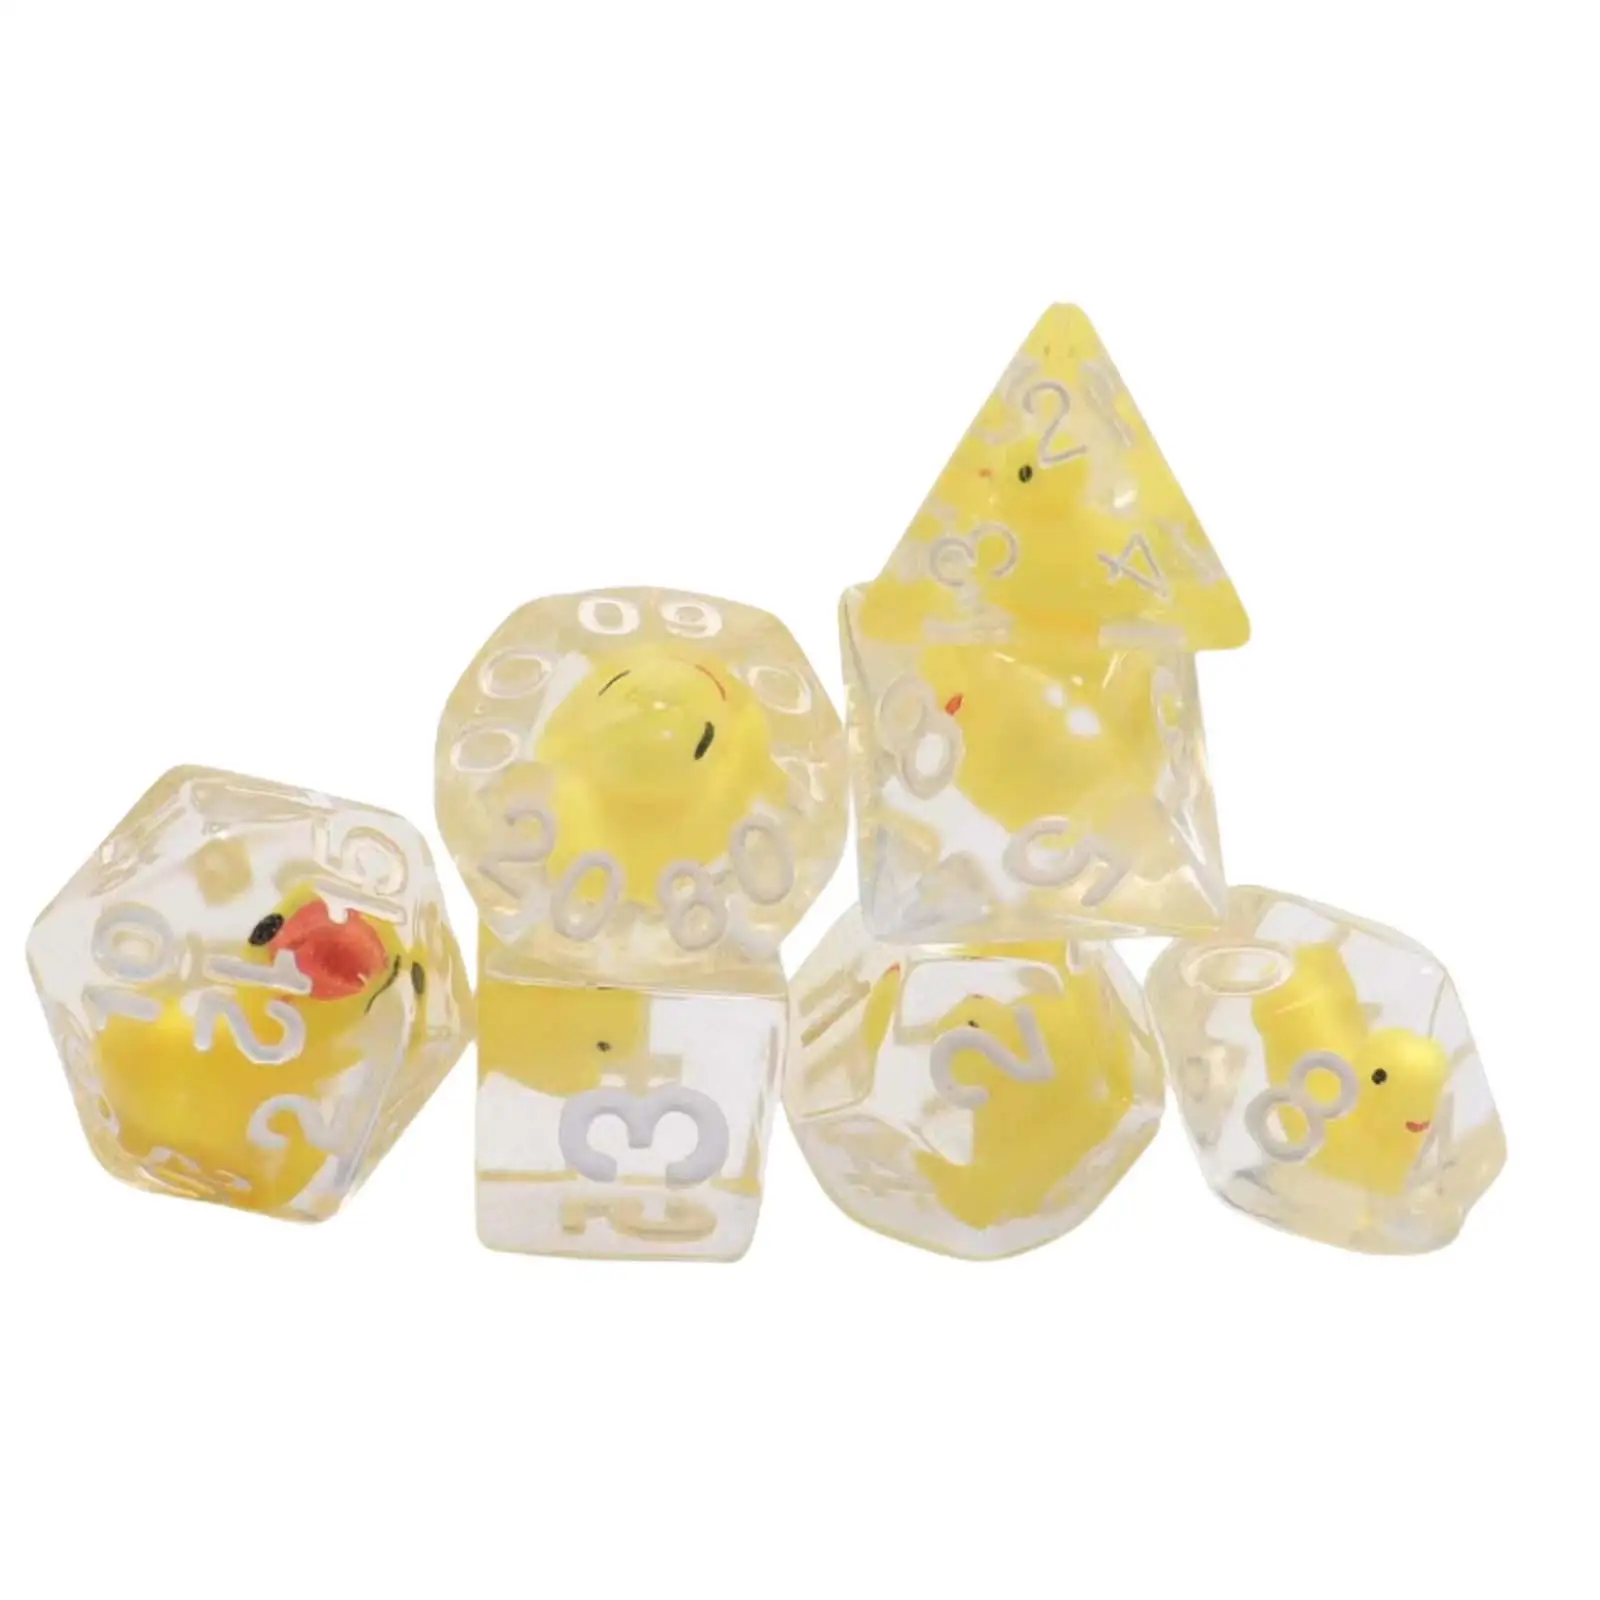 7 Pieces Polyhedral Dices Role Playing Game Dices Party Favors D4 D8 D10 D12 D20 Acrylic Dices for Party Bar Role Playing Game